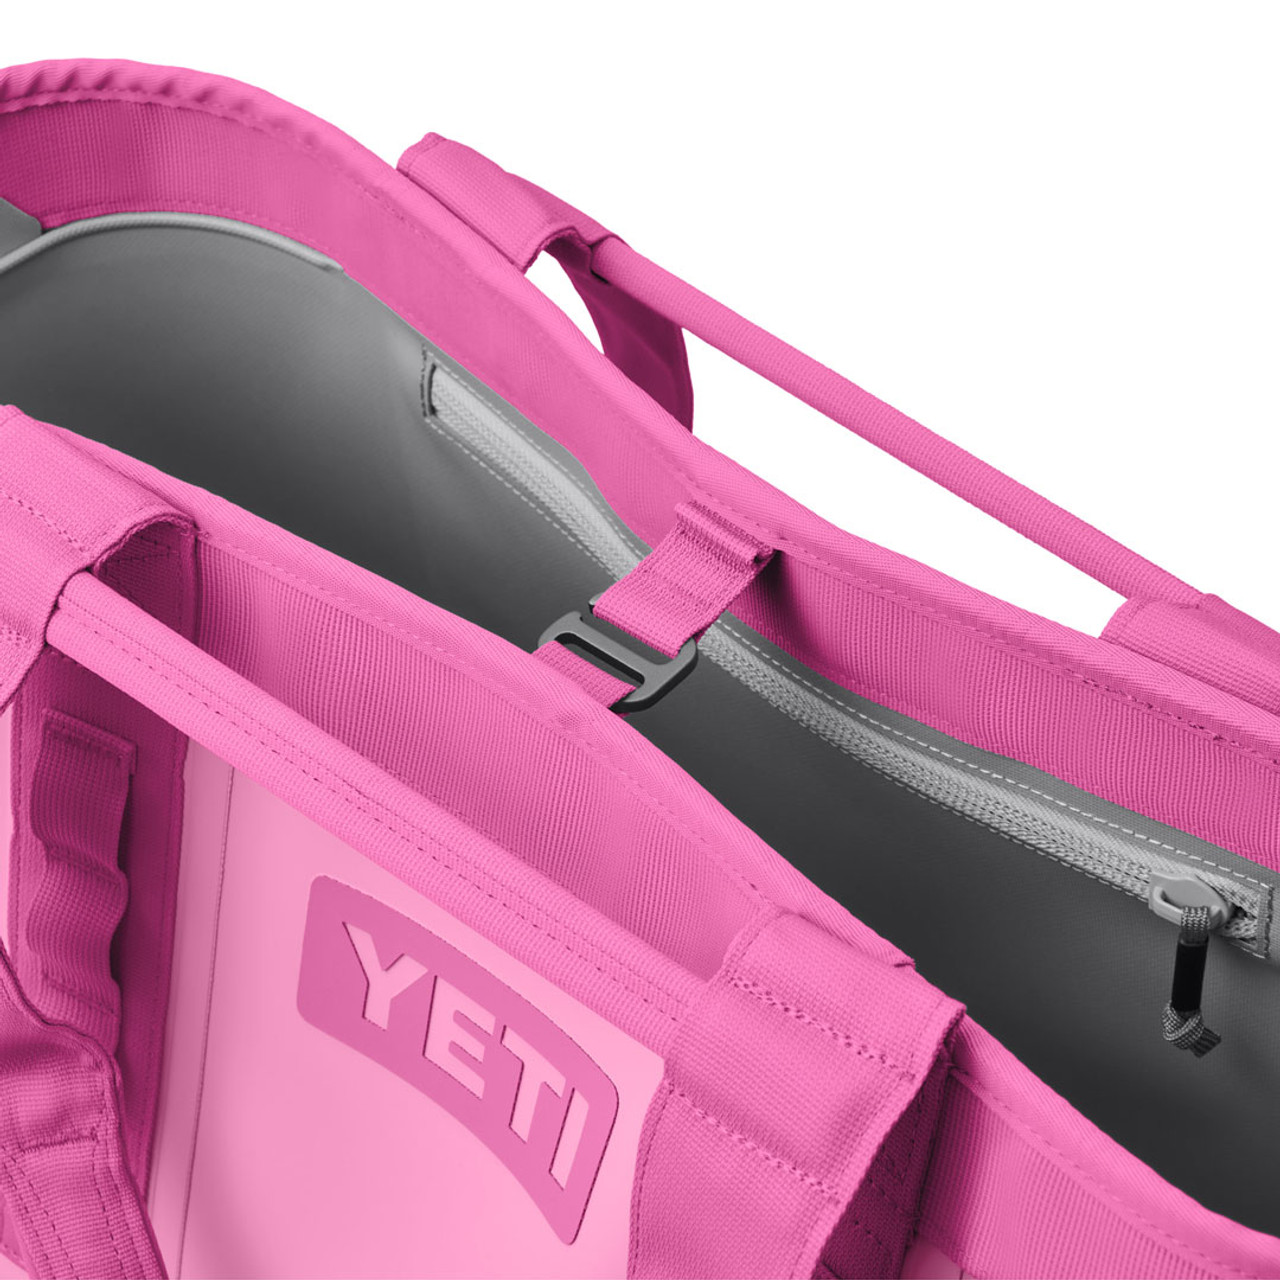 https://cdn11.bigcommerce.com/s-ppsyskcavg/images/stencil/1280x1280/products/68660/248053/YETI_Wholesale_site_studio_Bags_Camino_35_Power_Pink_Detail_Clasp_1664_B_2400x2400__99985.1694632352.jpg?c=2?imbypass=on